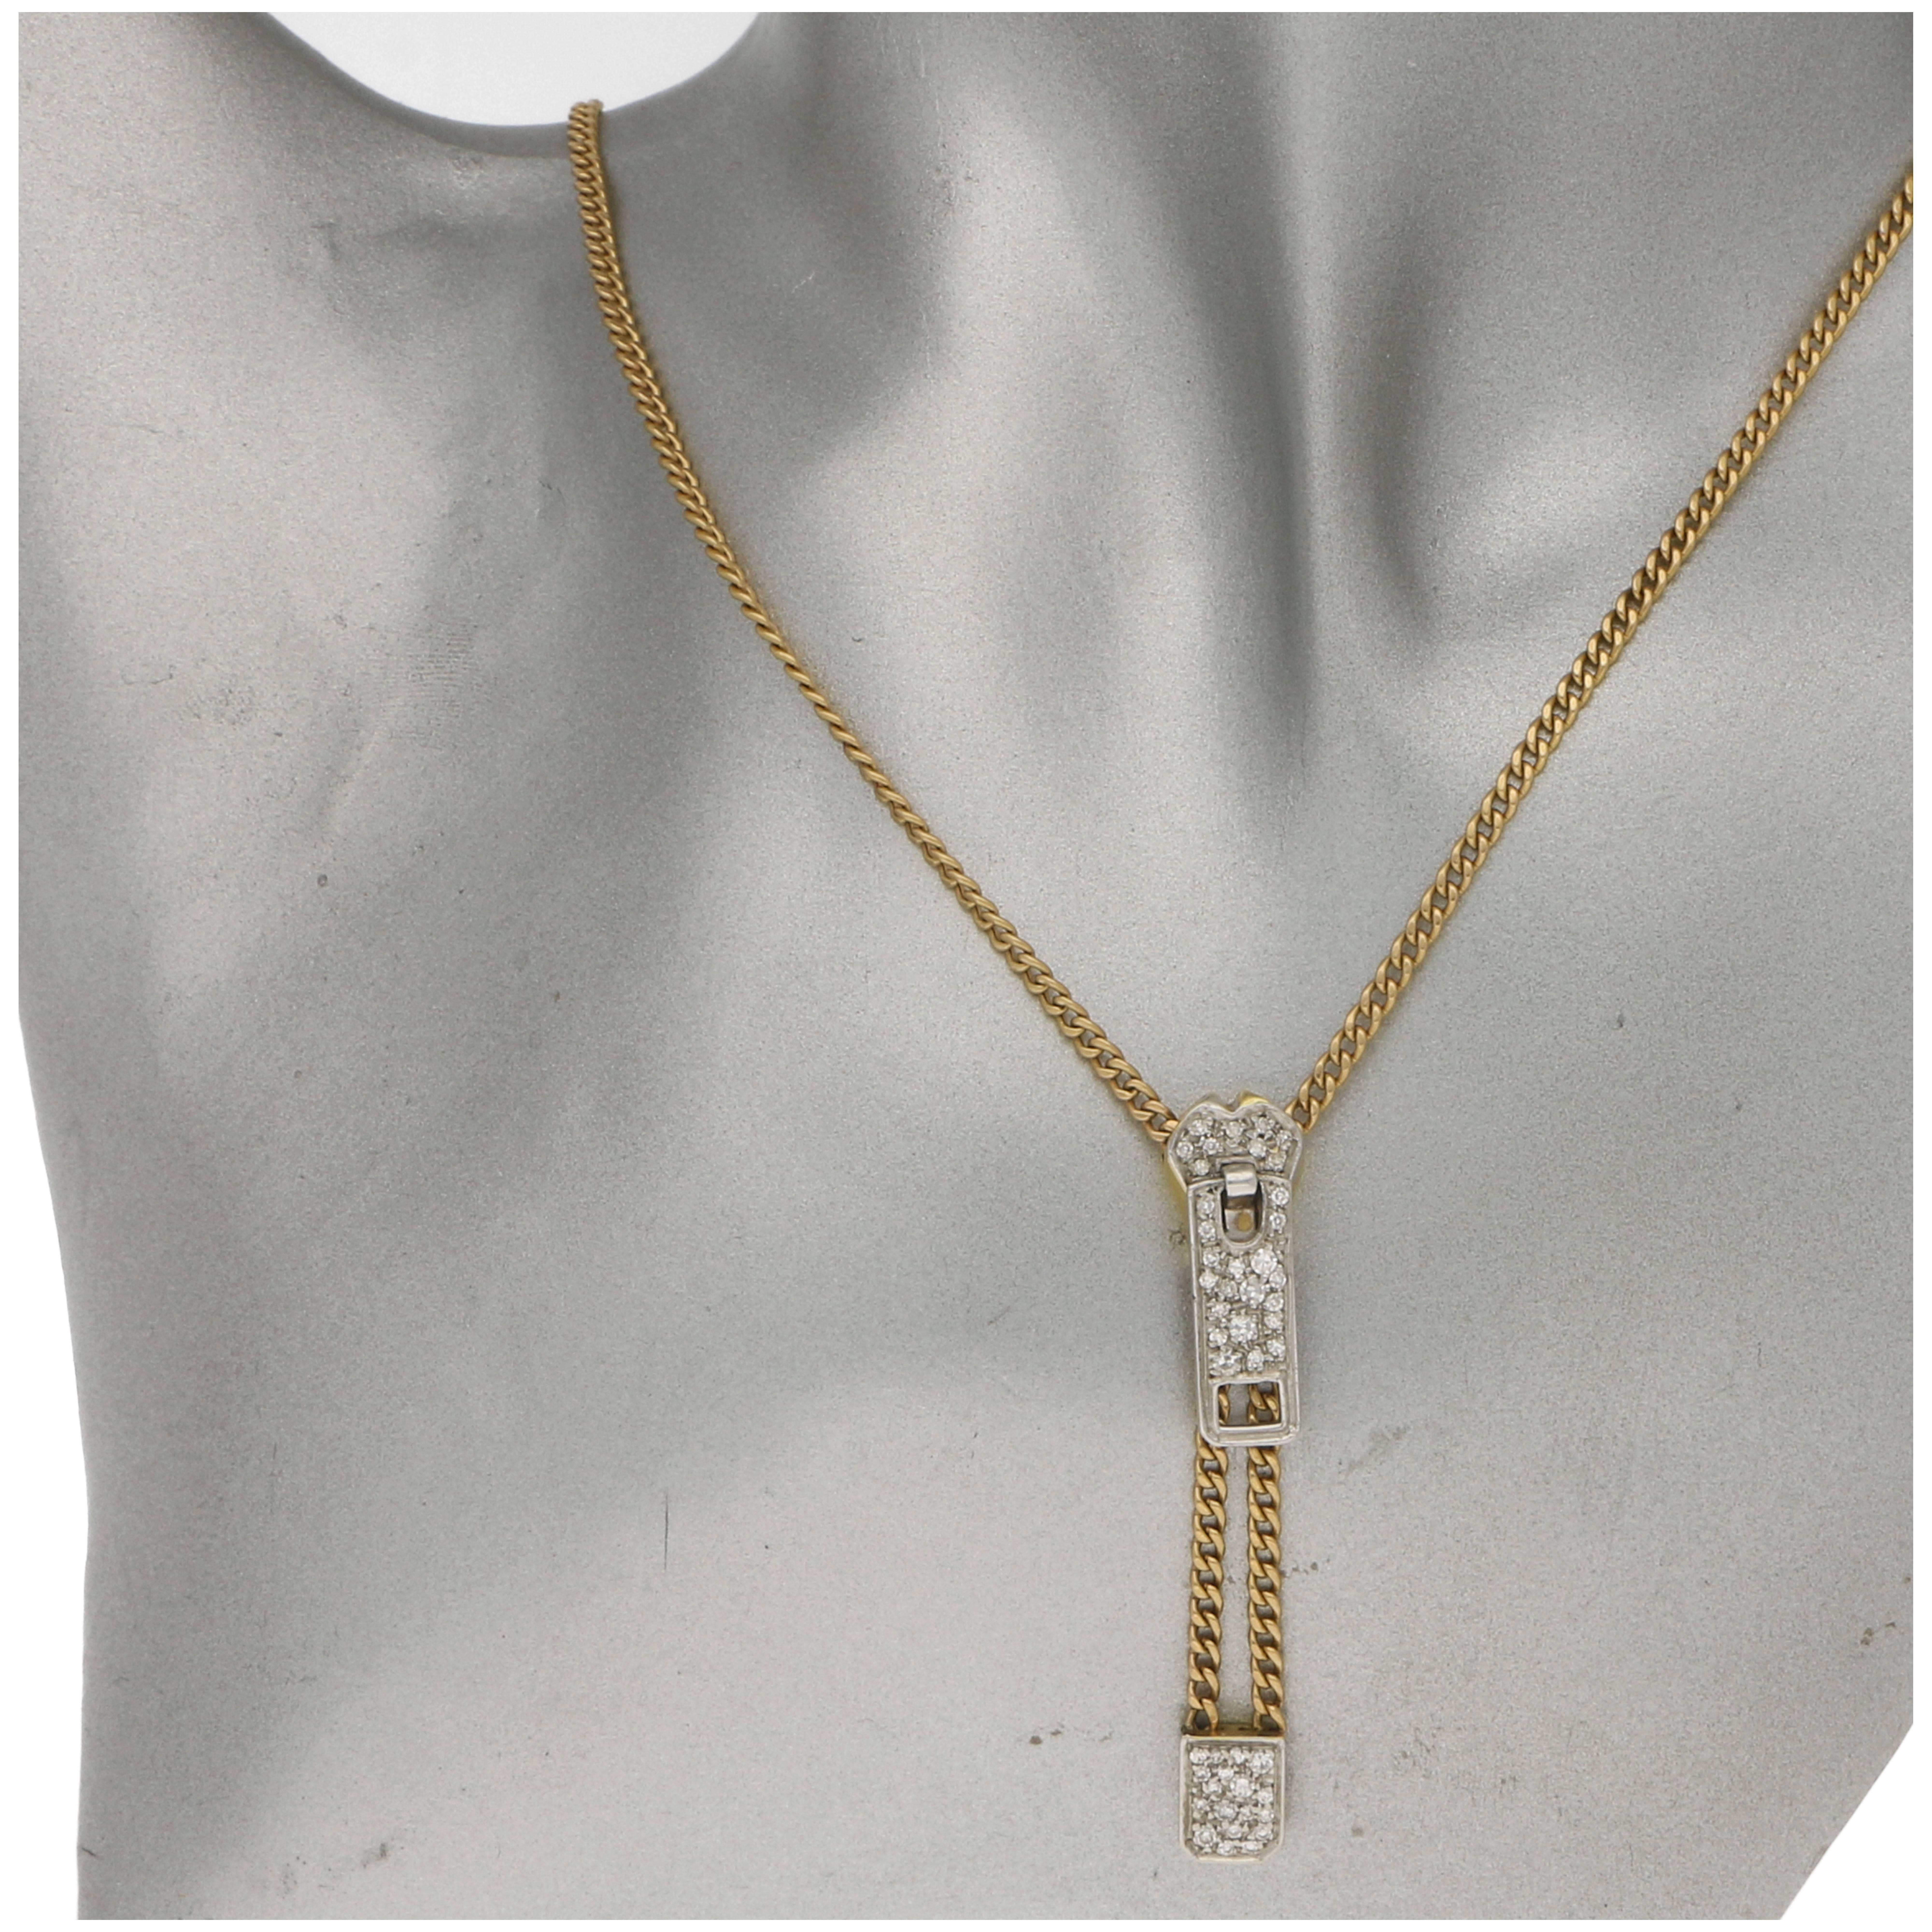 Estimated total diamond weight: 0.41 carats.
A fabulously quirky zipper necklace. 
The necklace is formed of a curb link chain in 14 carat yellow gold and is fitted with a working diamond set zip motif that runs up and down the chain and can be